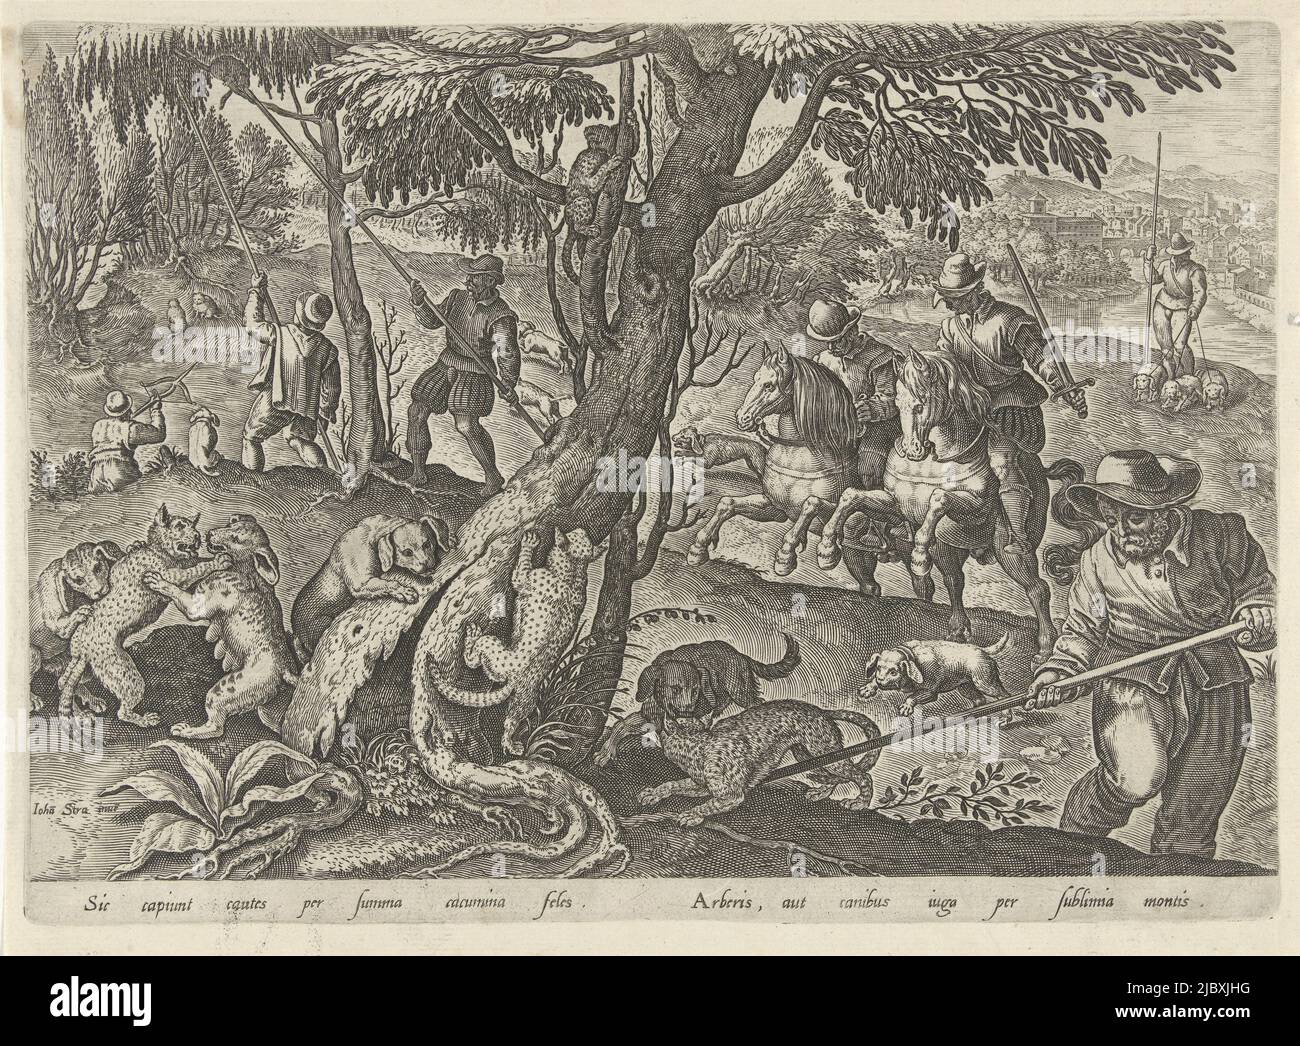 Hunters catch wild cats by knocking them out of trees with a long stick. Then the beasts fall prey to hunting dogs. The print has a Latin caption and is part of a 43-part series on hunting, Hunting Wild Cats Hunting Scenes (series title) In quibus omne genus venationis, aucupij, piscatusque (series title), print maker: Philips Galle, Jan van der Straet, (mentioned on object), publisher: Philips Galle, print maker: Antwerp, Florence, publisher: Antwerp, 1578, paper, engraving, w 301 mm × h 215 mm Stock Photo